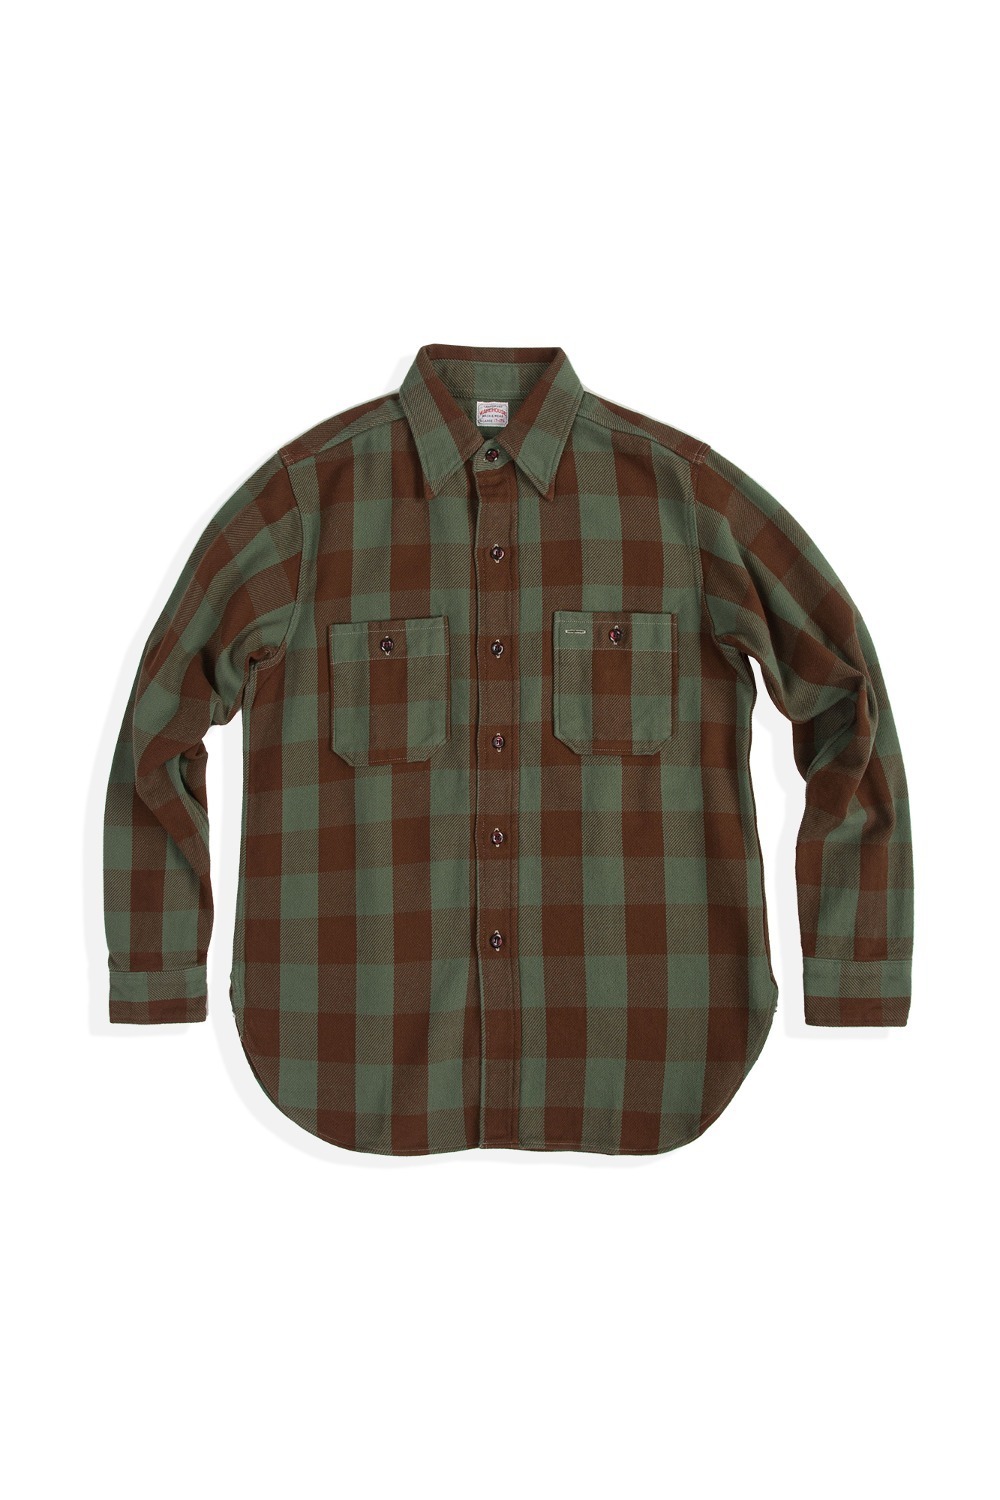 LOT 3104 FLANNEL SHIRTS PATTERN A BROWN/GREEN